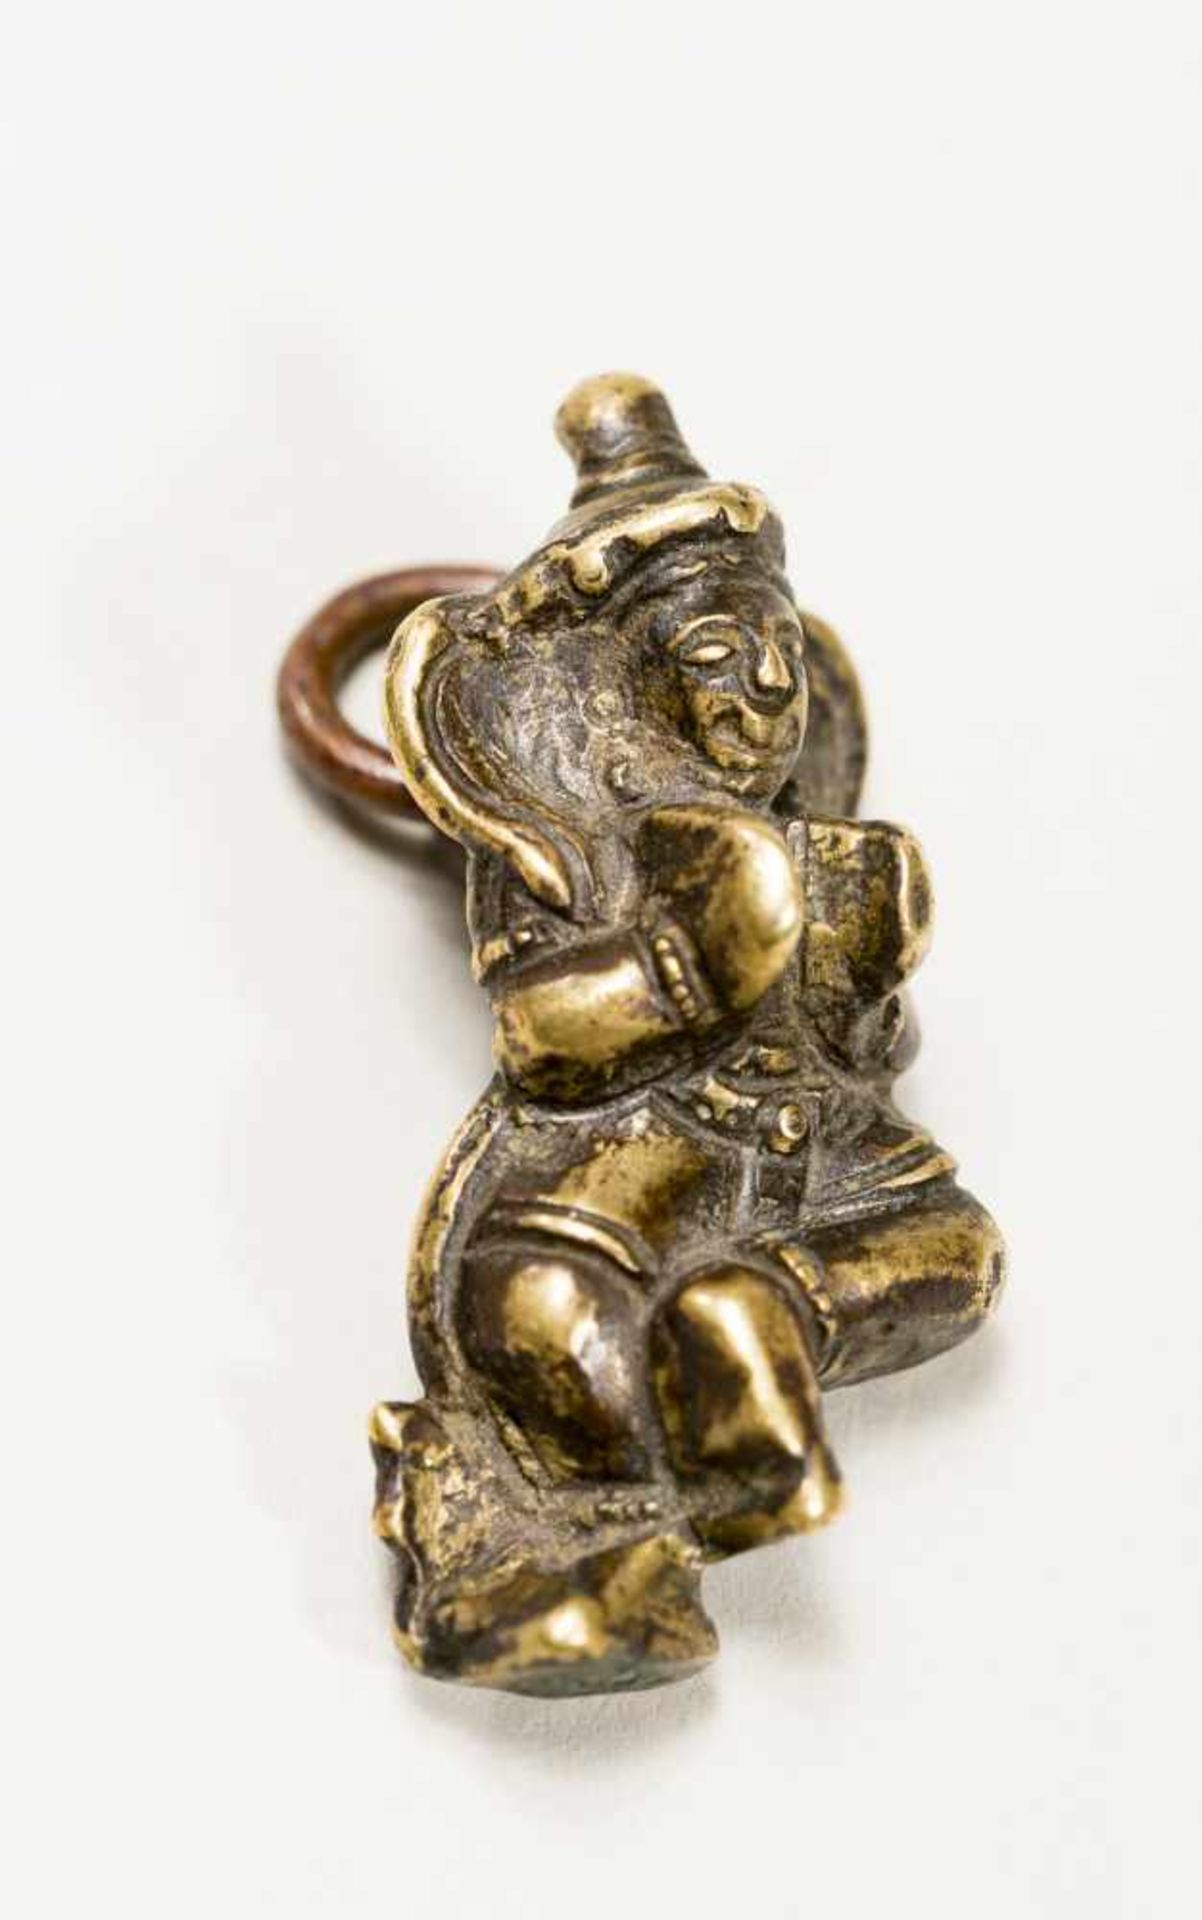 A TIBETAN MINIATURE BRONZE OF A DANCING BODHISATTVABronzeTibet, 18th to 19th centuryThis small